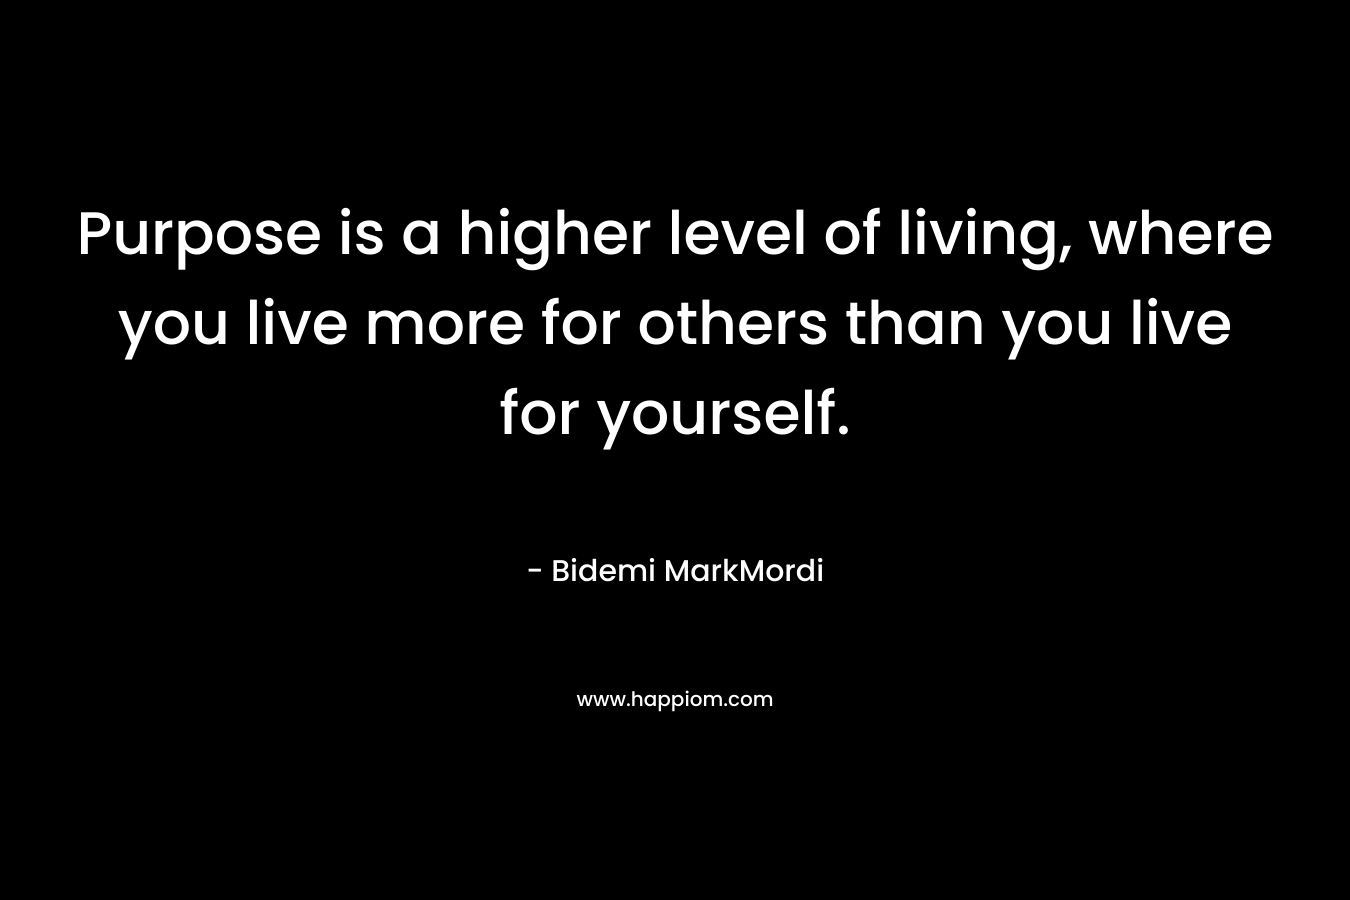 Purpose is a higher level of living, where you live more for others than you live for yourself. – Bidemi MarkMordi